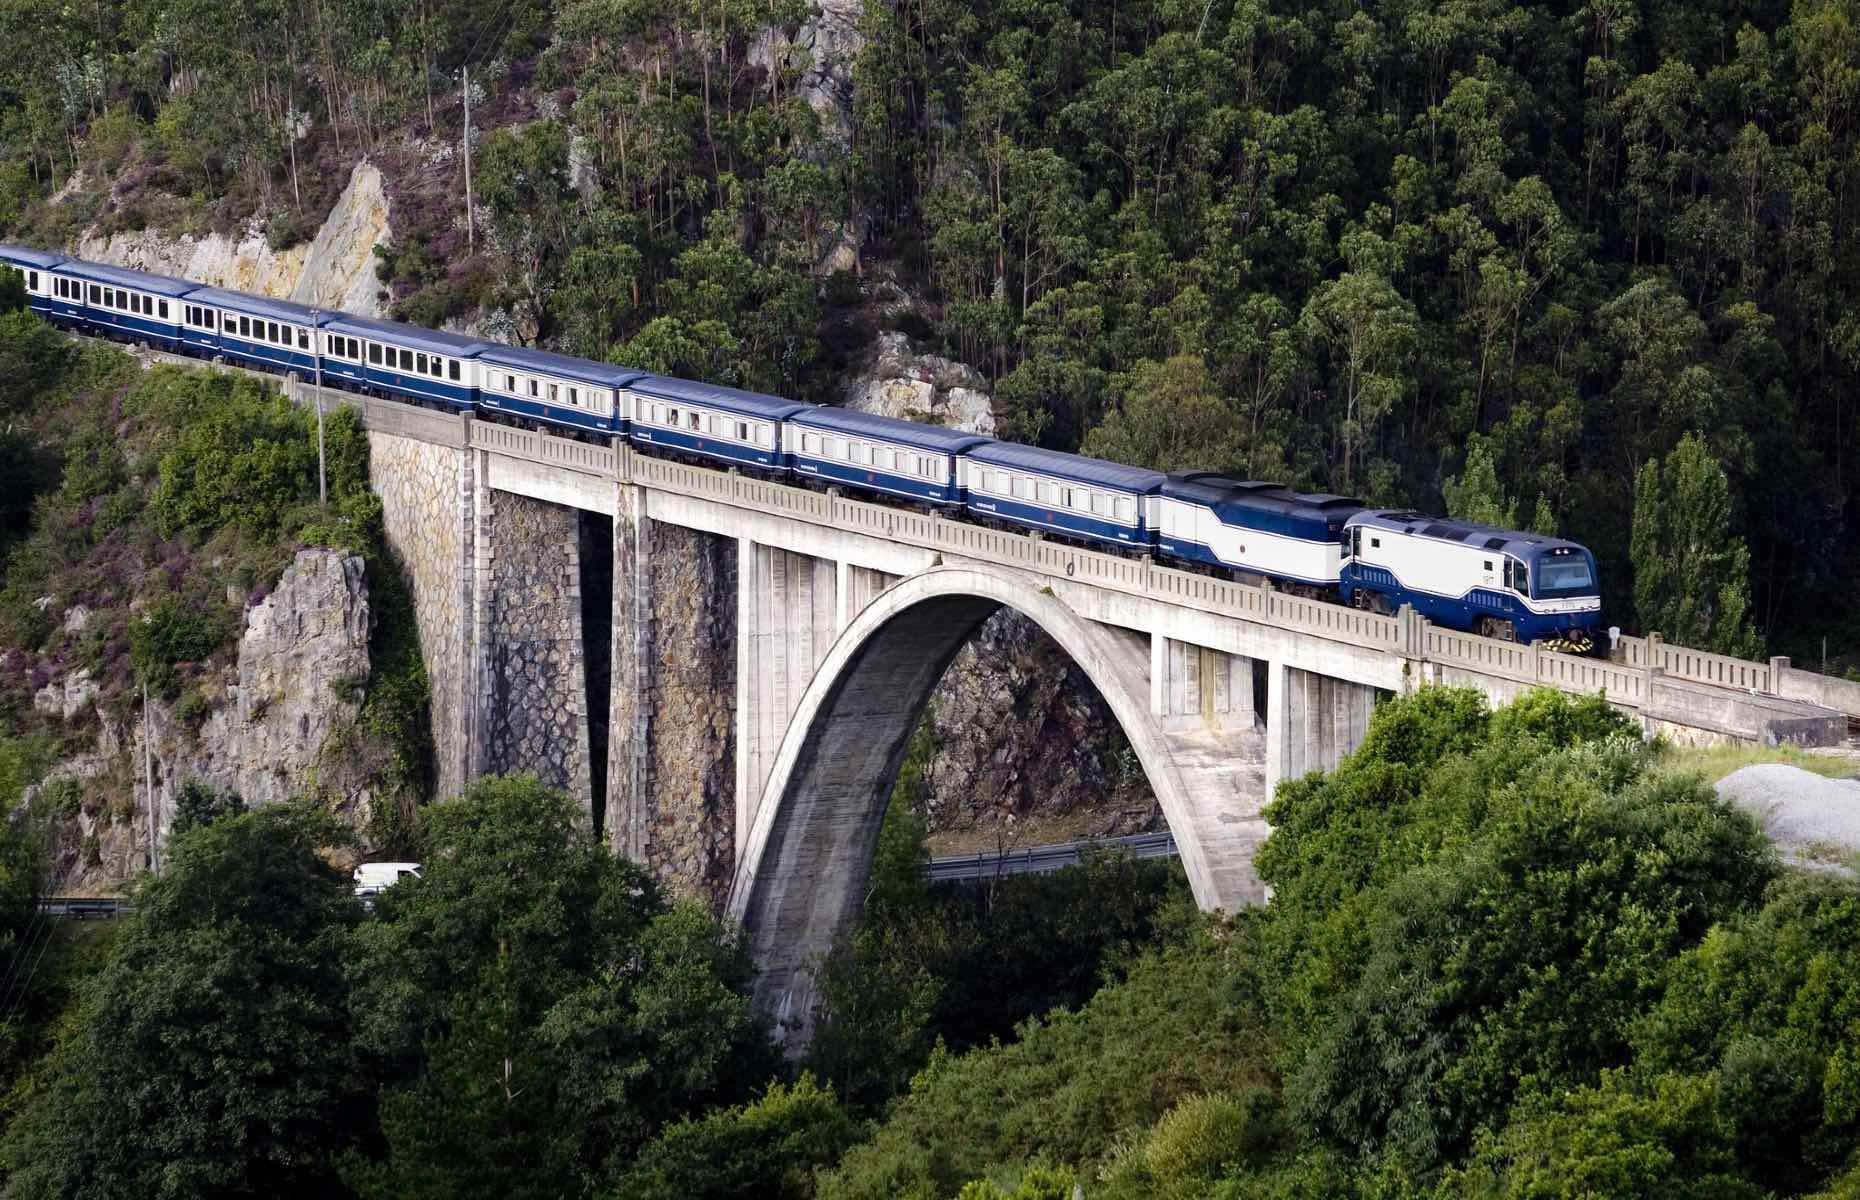 <p><a href="https://eltrentranscantabrico.com/en/">El Transcantabrico</a> may have narrower suites than other trains (due to the fact it runs on a narrow-gauge railway), but what they lack in space, they certainly make up for in style. Covering the northern coastal region of Spain, known as España Verde (or Green Spain), its seven-night trip from San Sebastian to Santiago de Compostela takes in some of the greatest landmarks. Standout scenery includes the Santander beaches and cultural highlights include the 19th century El Capricho – a palace designed by Antonio Gaudí – and Bilbao’s famous Guggenheim Museum.</p>